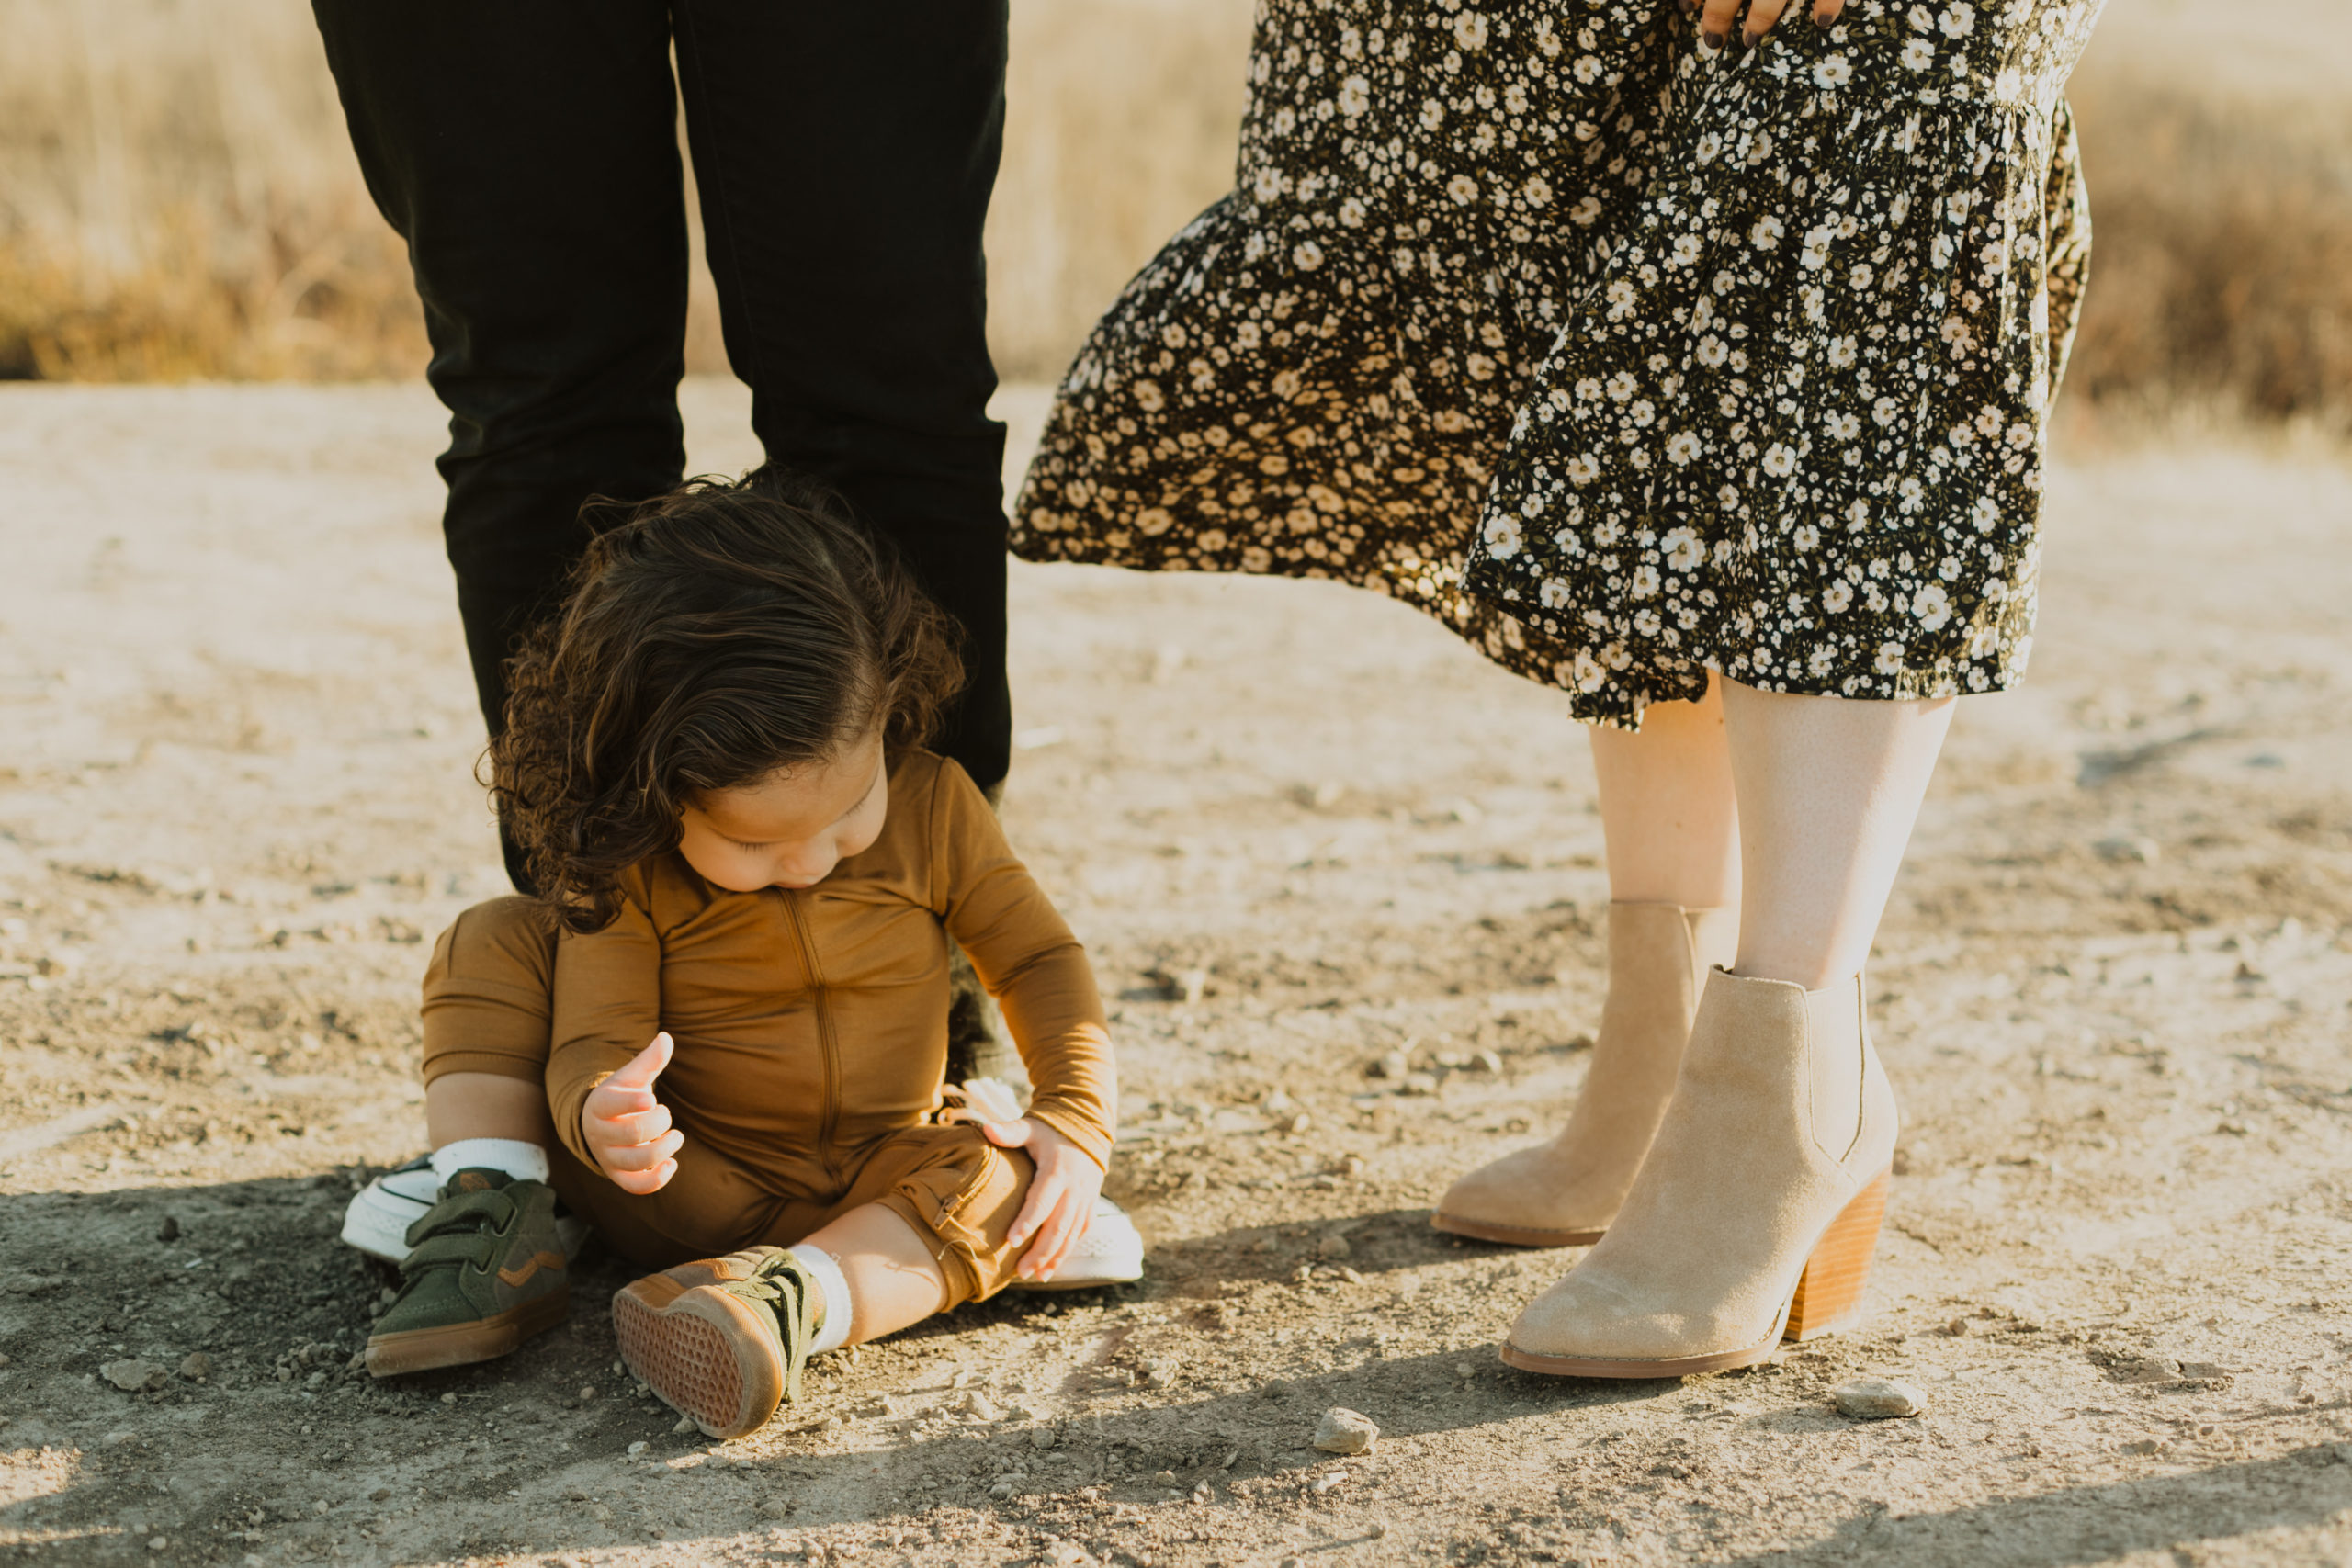 shot focused on baby sitting on the ground next to parents feet